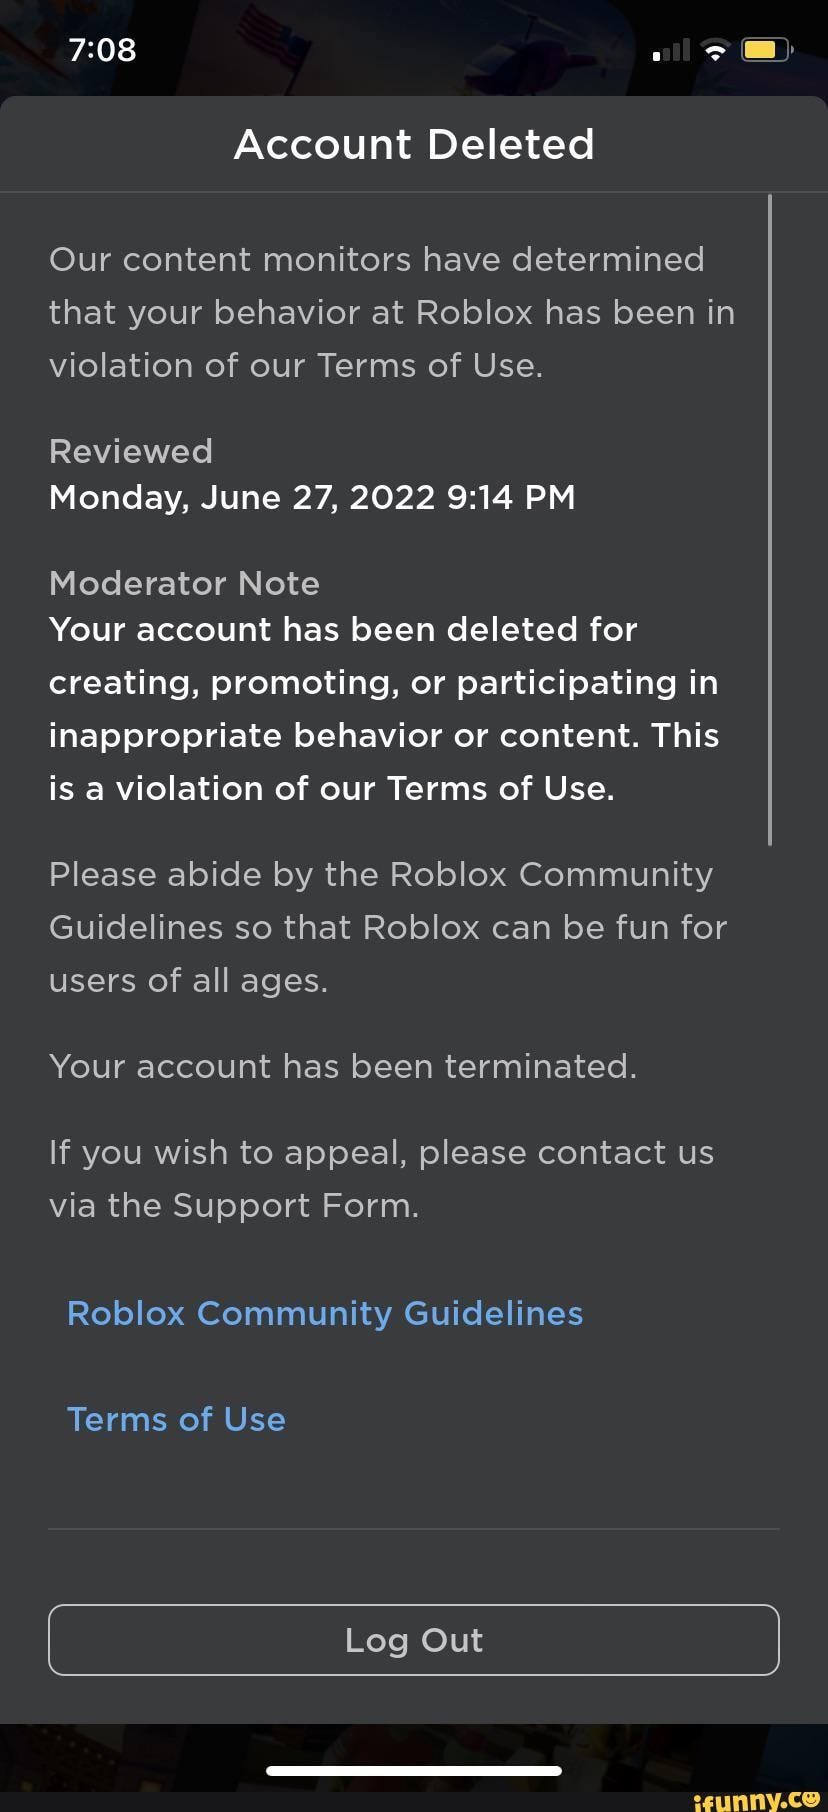 Scared roblox moderation forever - Warning jed: AM your hes jerator Note:  The only links that you are allowed to share in are roblox.com,  .com, twitter.com, and twitch.tv. Posting other links, even